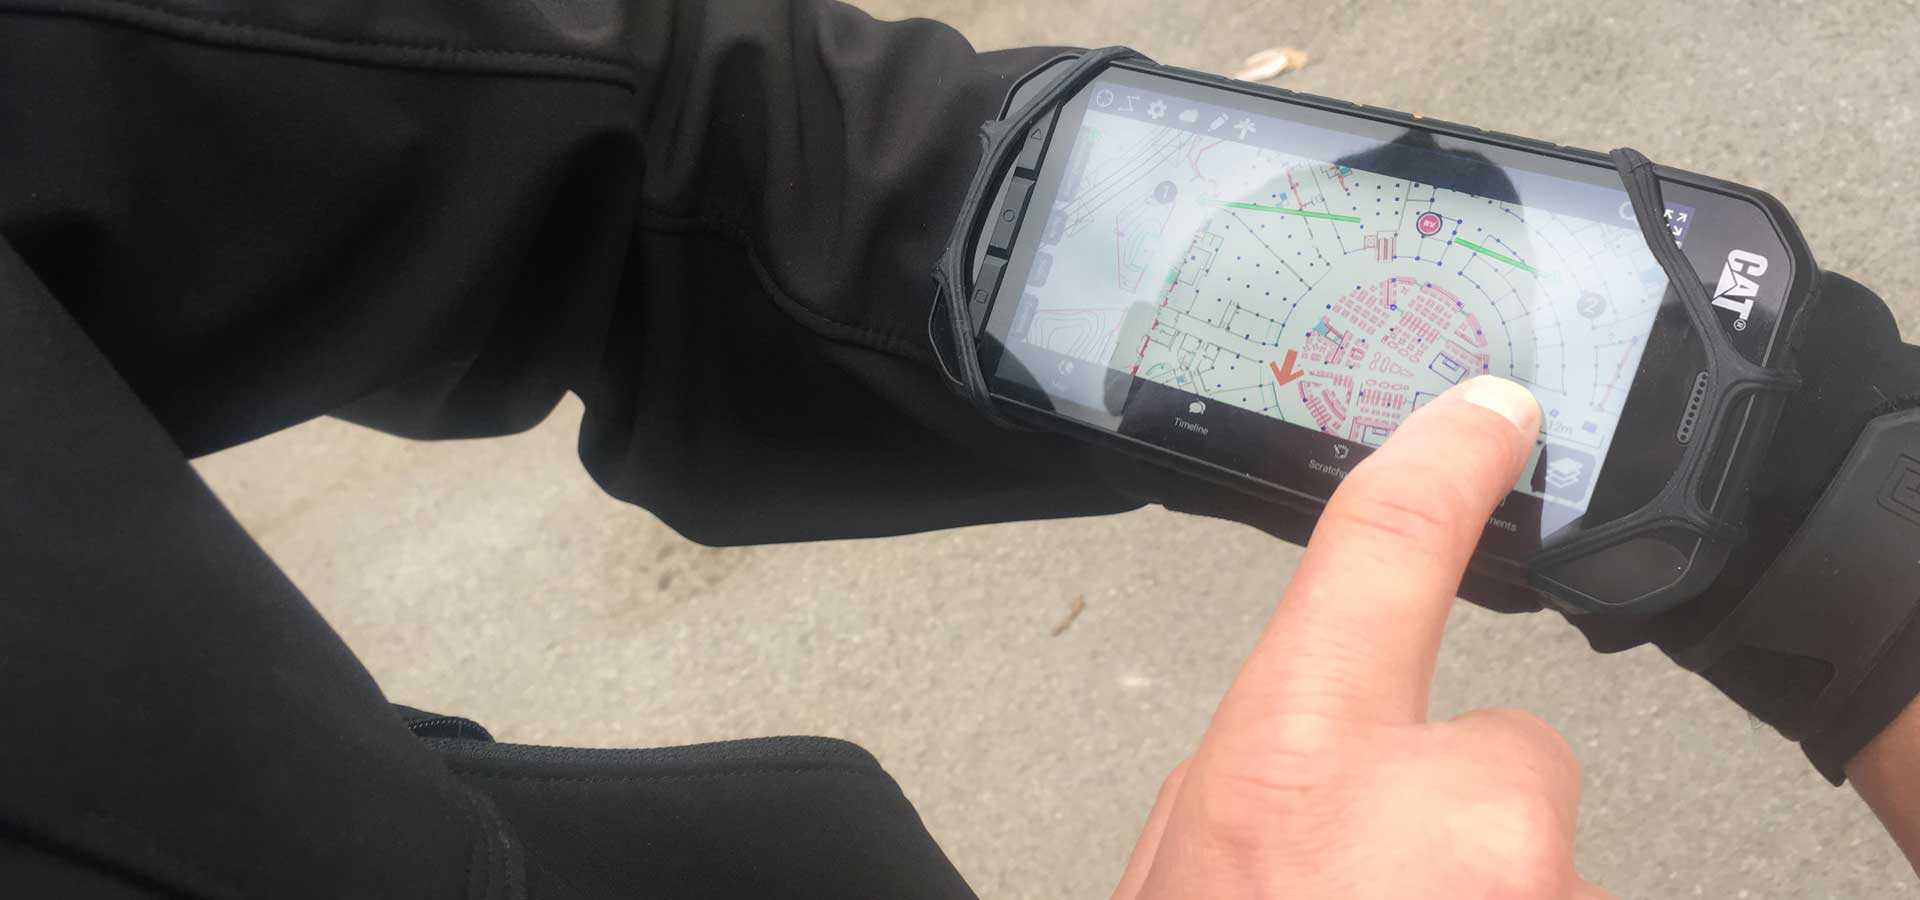 hand held device showing map